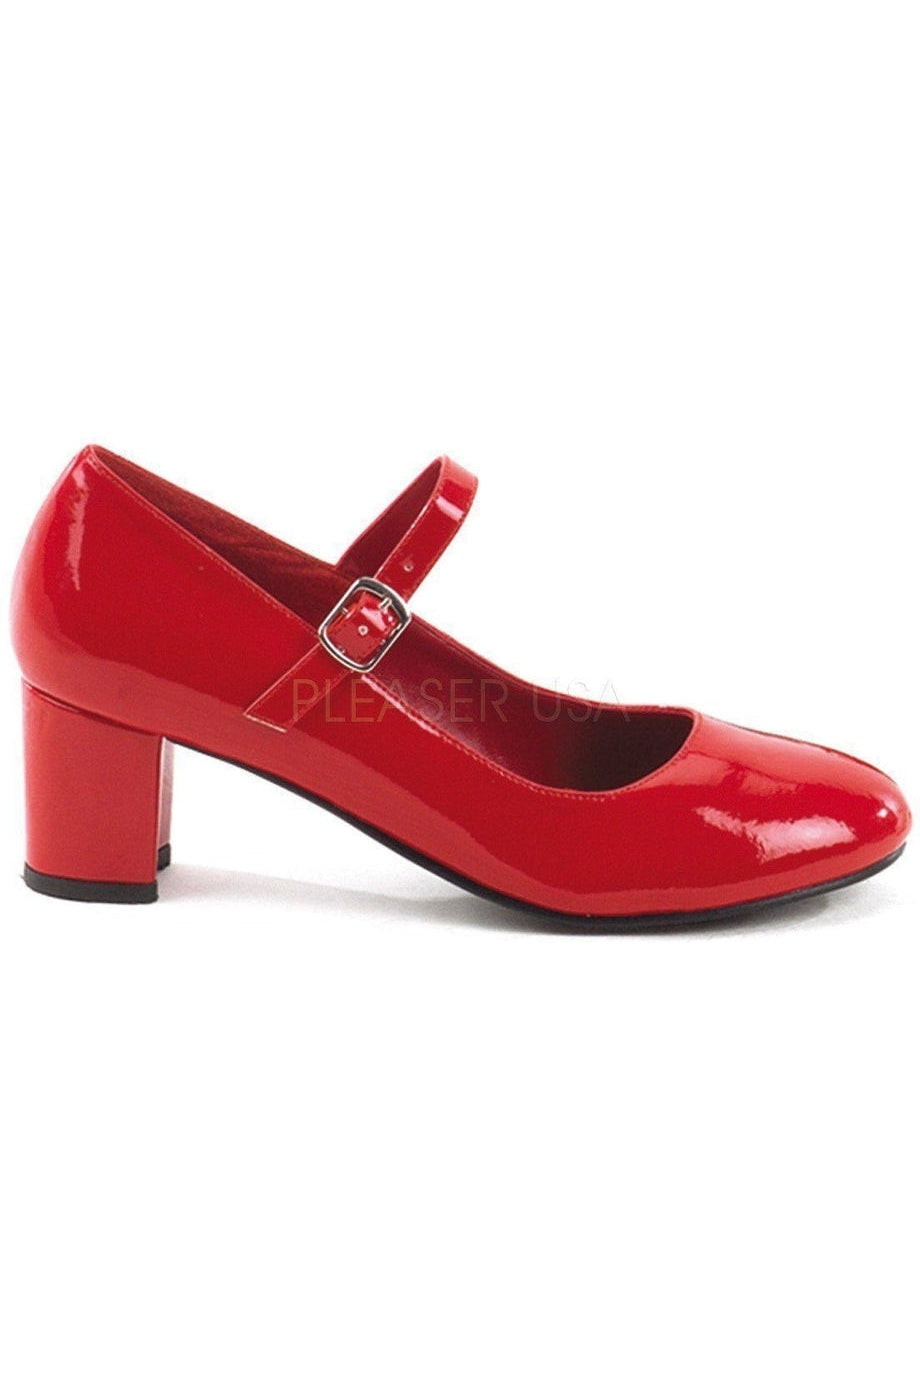 SCHOOLGIRL-50 Mary Jane | Red Patent-Funtasma-Red-Mary Janes-SEXYSHOES.COM